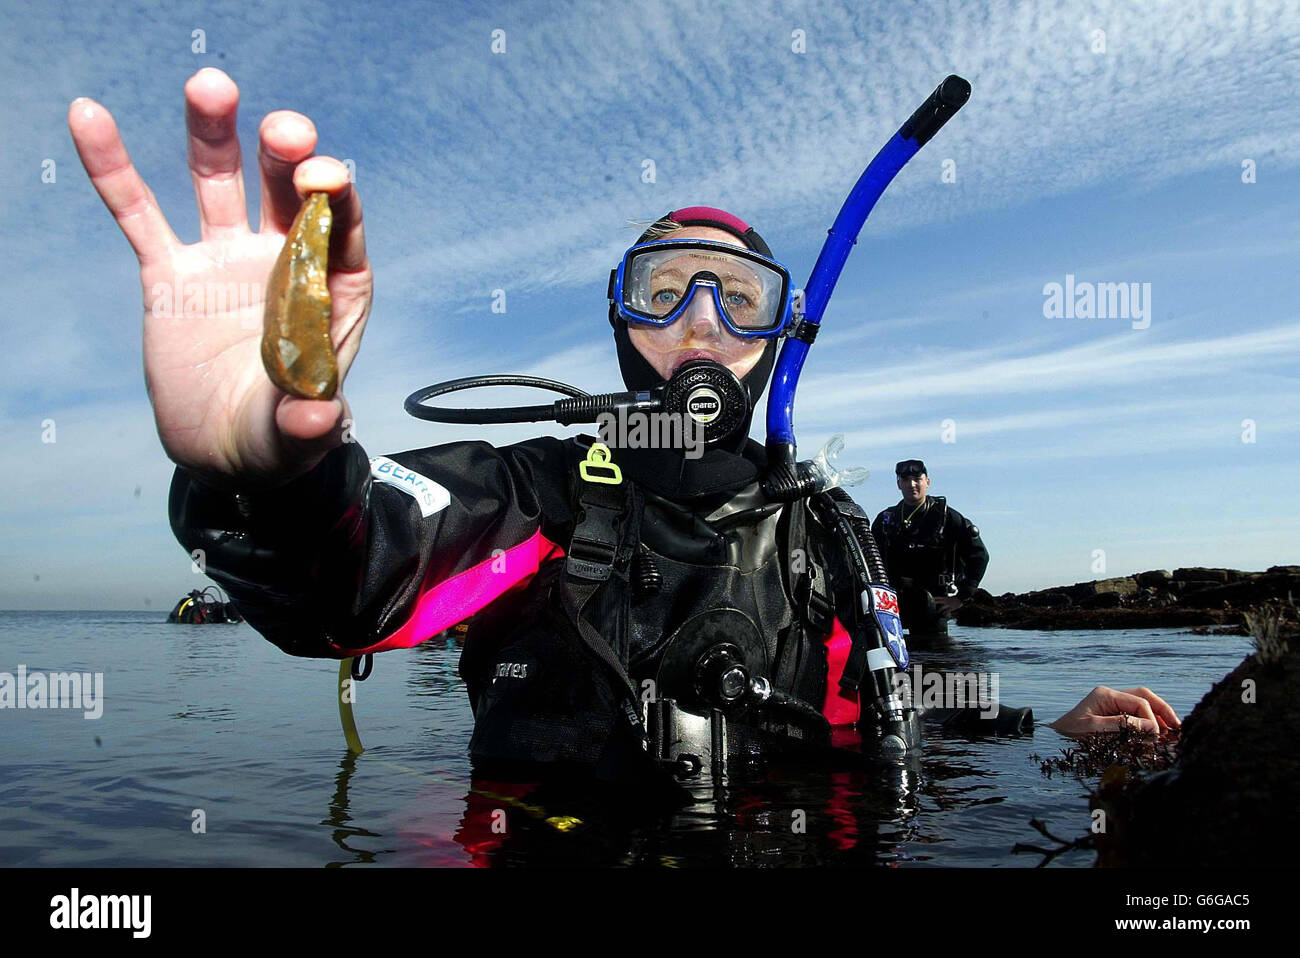 Dr Penny Spikins in the north sea at Tynemouth, with a stone found by her team of scuba-diving archaeologists when they discovered an undersea settlement that could be 10,000 years old. The settlement, found in the mouth of the River Tyne, is believed to be the country's second submerged Stone Age development. Stock Photo